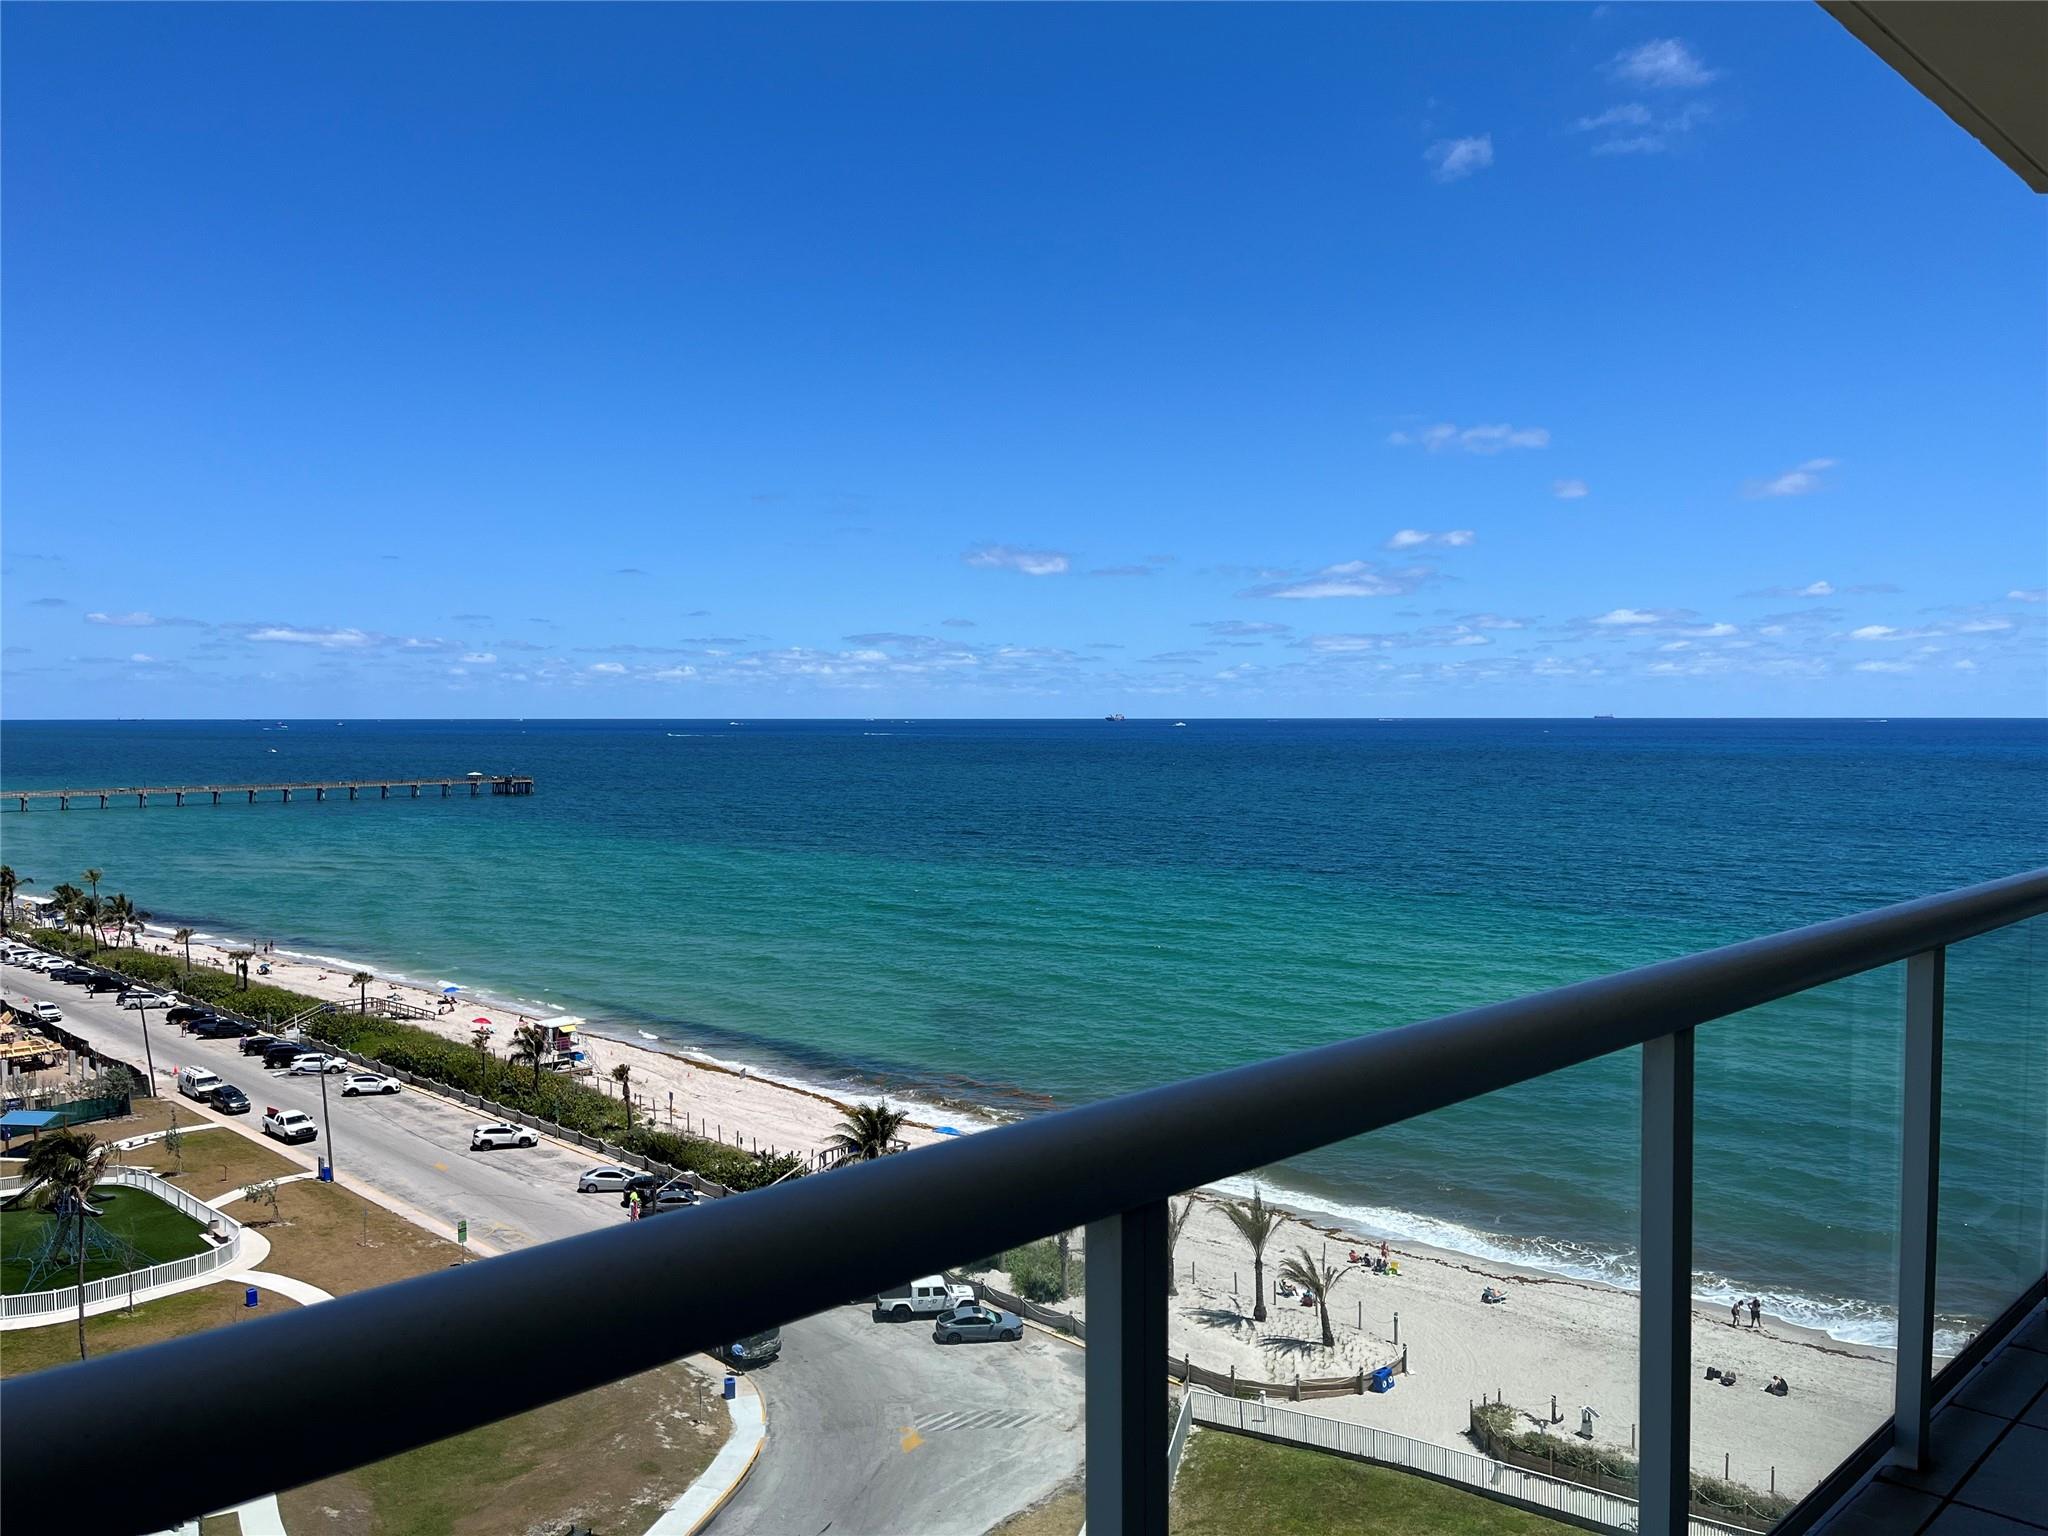 AMAZING VIEWS! ELEGANT & CONVENIENT PRIVATE ELEVATOR DIRECTLY INTO THIS LUXURY CORNER UNIT W/ MESMERIZING UNOBSTRUCTED VIEWS OF THE OCEAN,COASTLINE TO PORT OF FT LAUDERDALE, INTRACOASTAL & STATE PARK PRESERVE. ENJOY THE PANORAMIC SKYLINE,SUNSETS & SUNRISES FROM THE EXPANSIVE WRAP AROUND BALCONY! FEATURING FLOOR TO CEILING WINDOWS & SLIDING DOORS, TRAVERTINE FLOORING THRU-OUT, PRIMARY BEDRM'S ENSUITE BATHROOM WITH DUAL VANITIES, SPA TUB, & SEPARATE SHOWER. 2 WARDROBE CLOSETS. 3RD BEDROOM IS SMARTLY USED AS DEN/OFFICE. WATERVIEWS FROM EVERY ROOM! STATE-OF-THE-ART AMENITIES: 2 POOLS, SPA, FITNESS CENTERS, TENNIS,CAFE, BEACH SERVICES, & 24 HOUR SECURITY. *GARAGE PARKING SPACE*.  THE BEAUTY OF THIS RESIDENCE BEGINS AT THE GATE ENTRANCE WITH ACRES OF LUSH LANDSCAPING! PET FRIENDLY WITH DOG PARK!